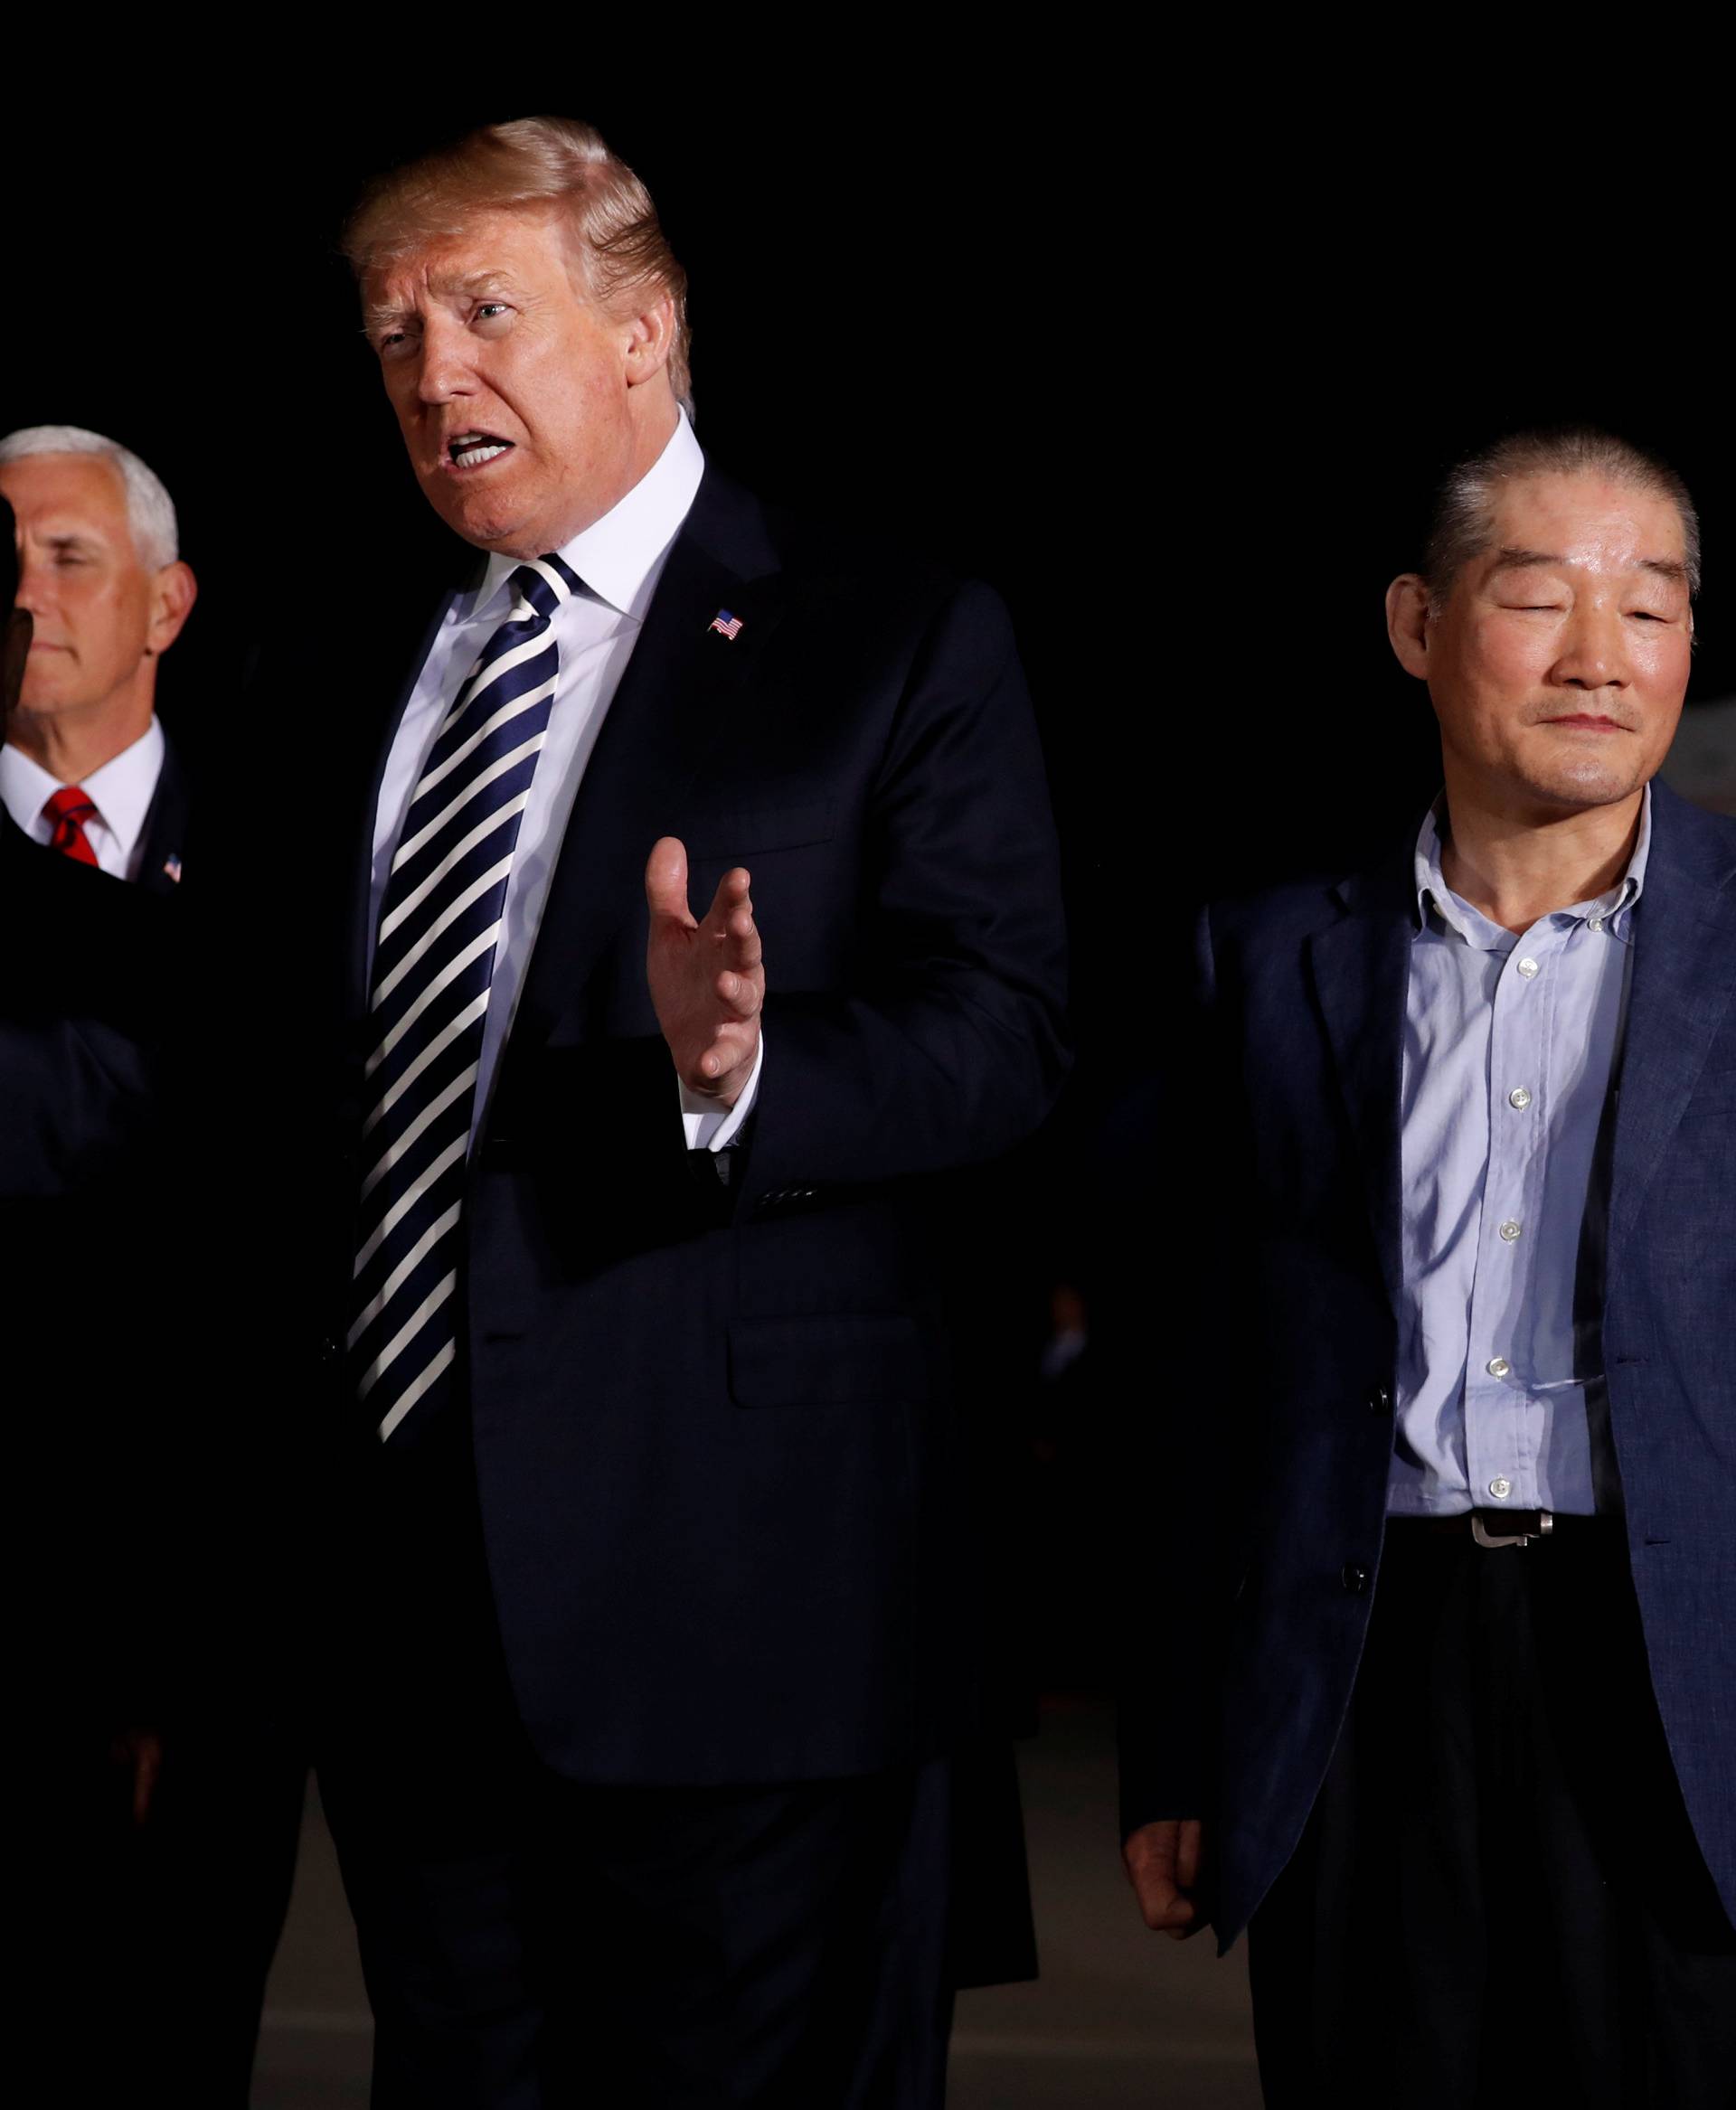 U.S.President Donald Trump speaks to the media as he meets the Americans released from detention in North Korea, Tony Kim, Kim Hak-song and Kim Dong-chul, upon their arrival at Joint Base Andrews